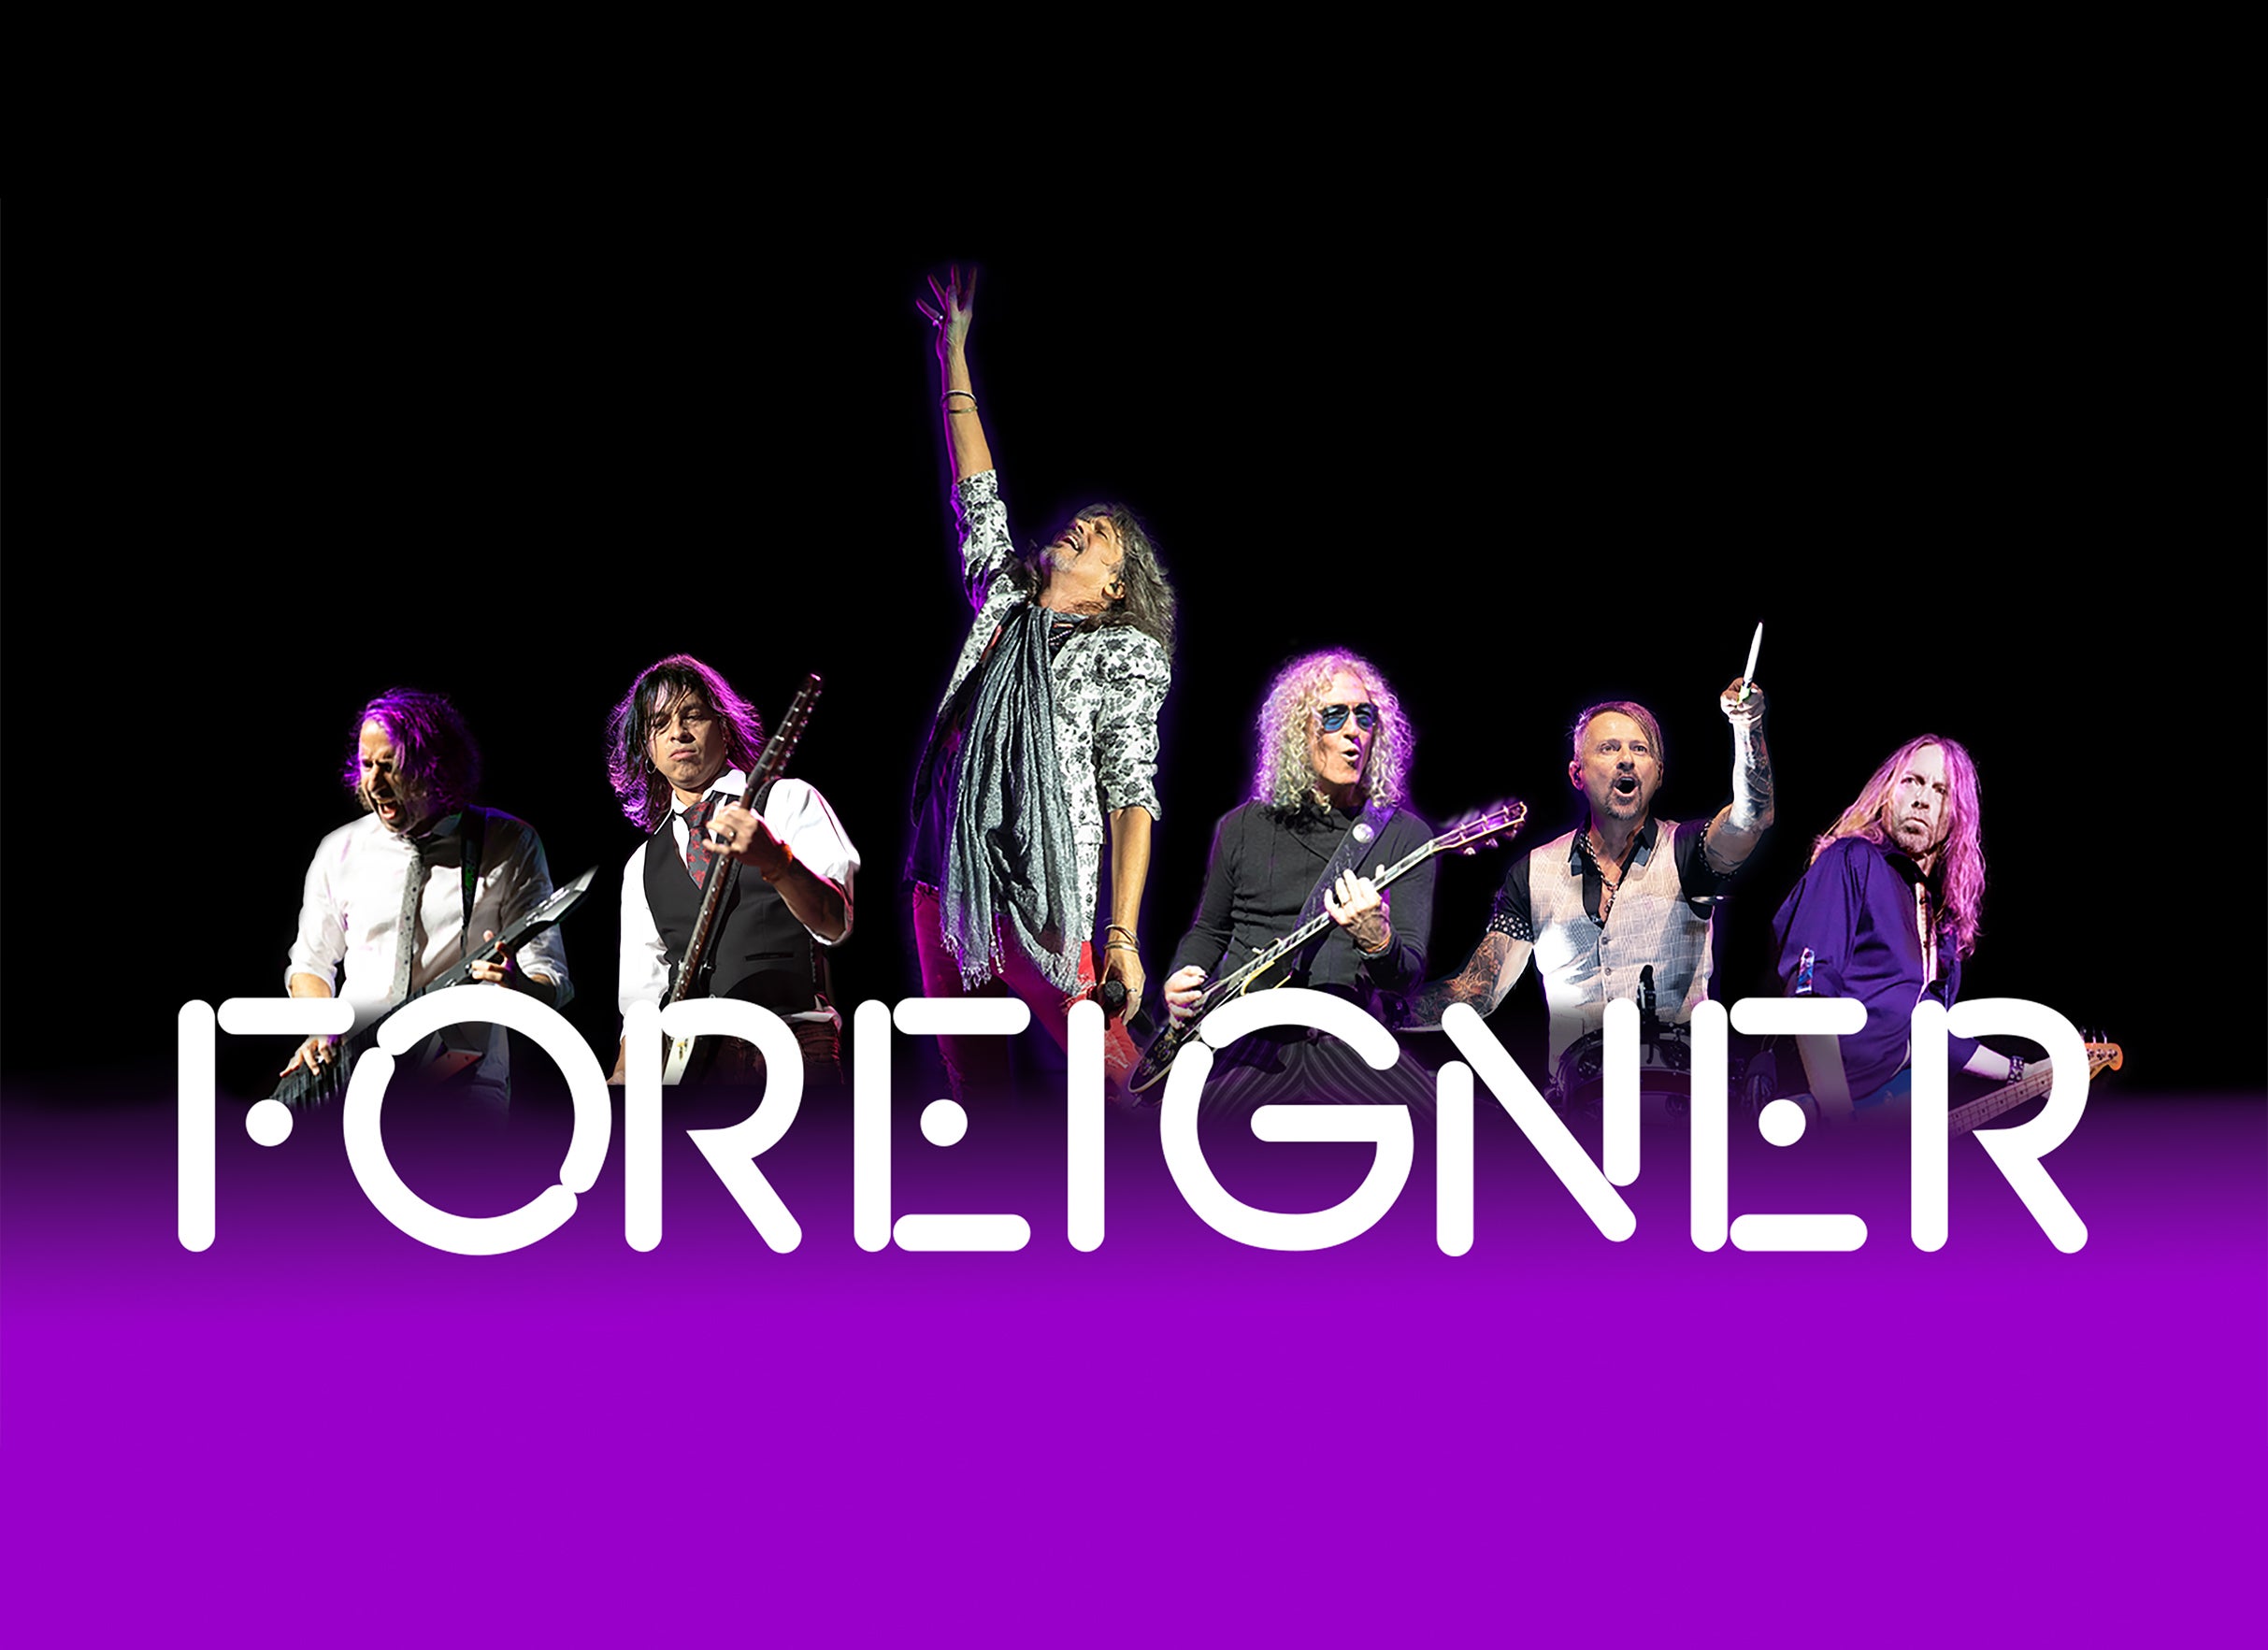 Foreigner: Feels Like the Last Time Farewell Tour in Las Vegas promo photo for Citi® Cardmember Preferred presale offer code